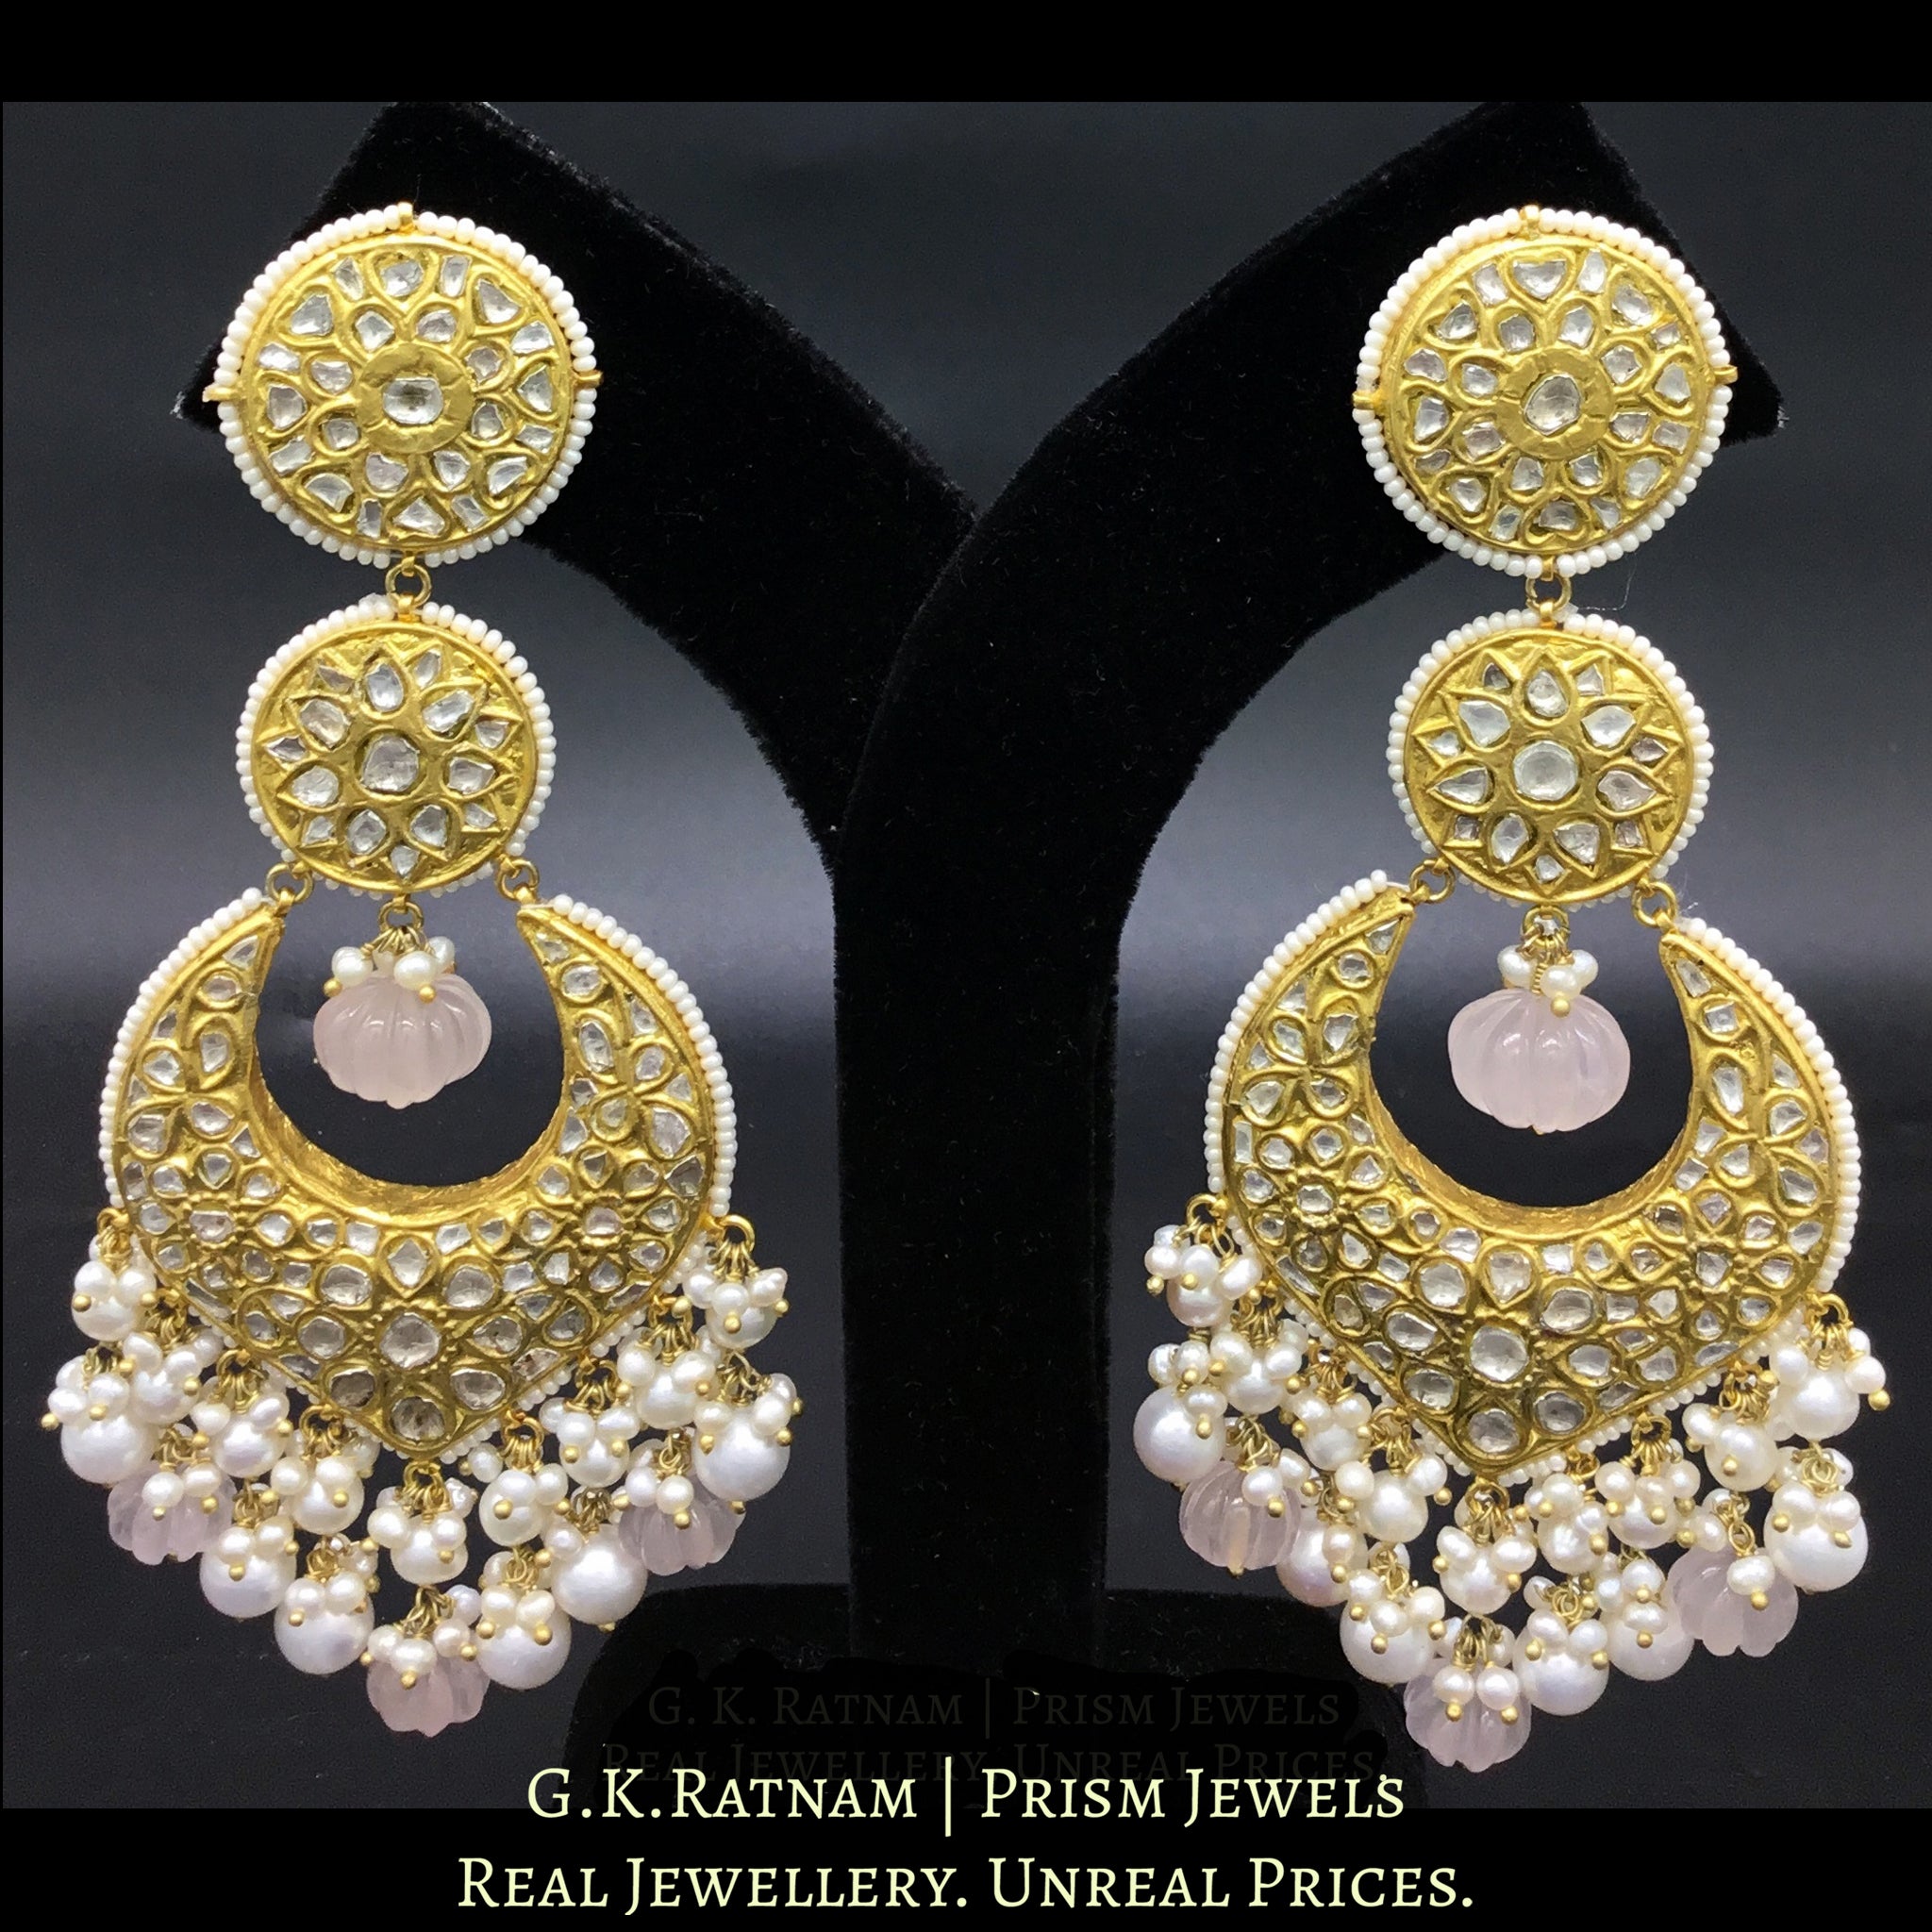 23k Gold and Diamond Polki Long Chand Bali Earring Pair with Rose Quartz Beads and Hyderabadi Pearls